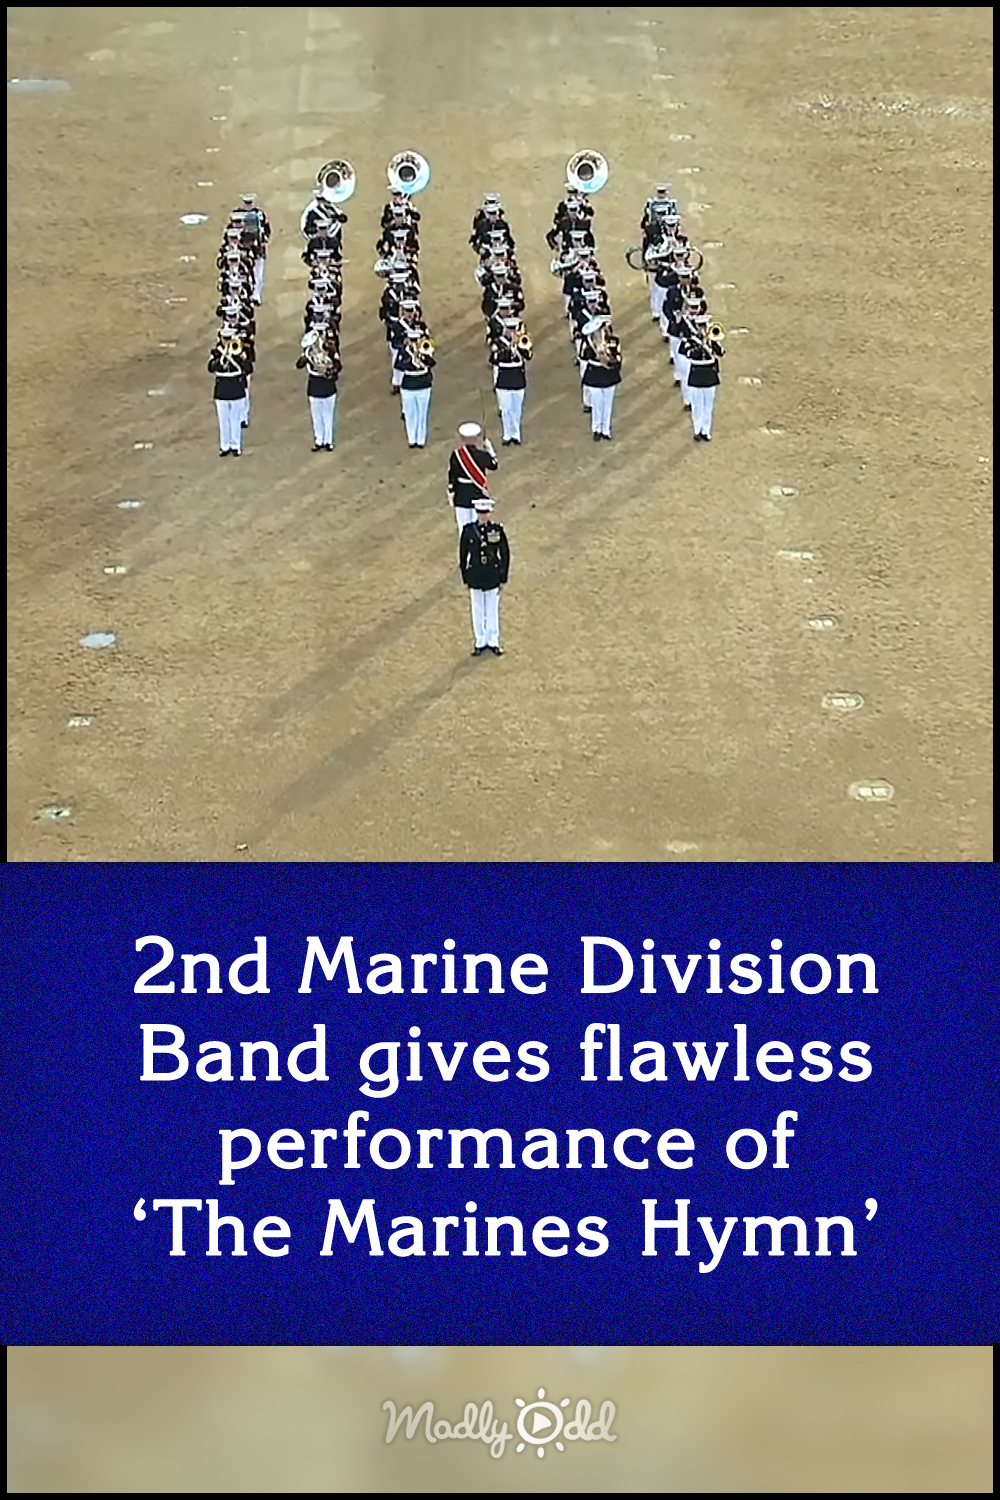 2nd Marine Division Band gives flawless performance of ‘The Marines Hymn’